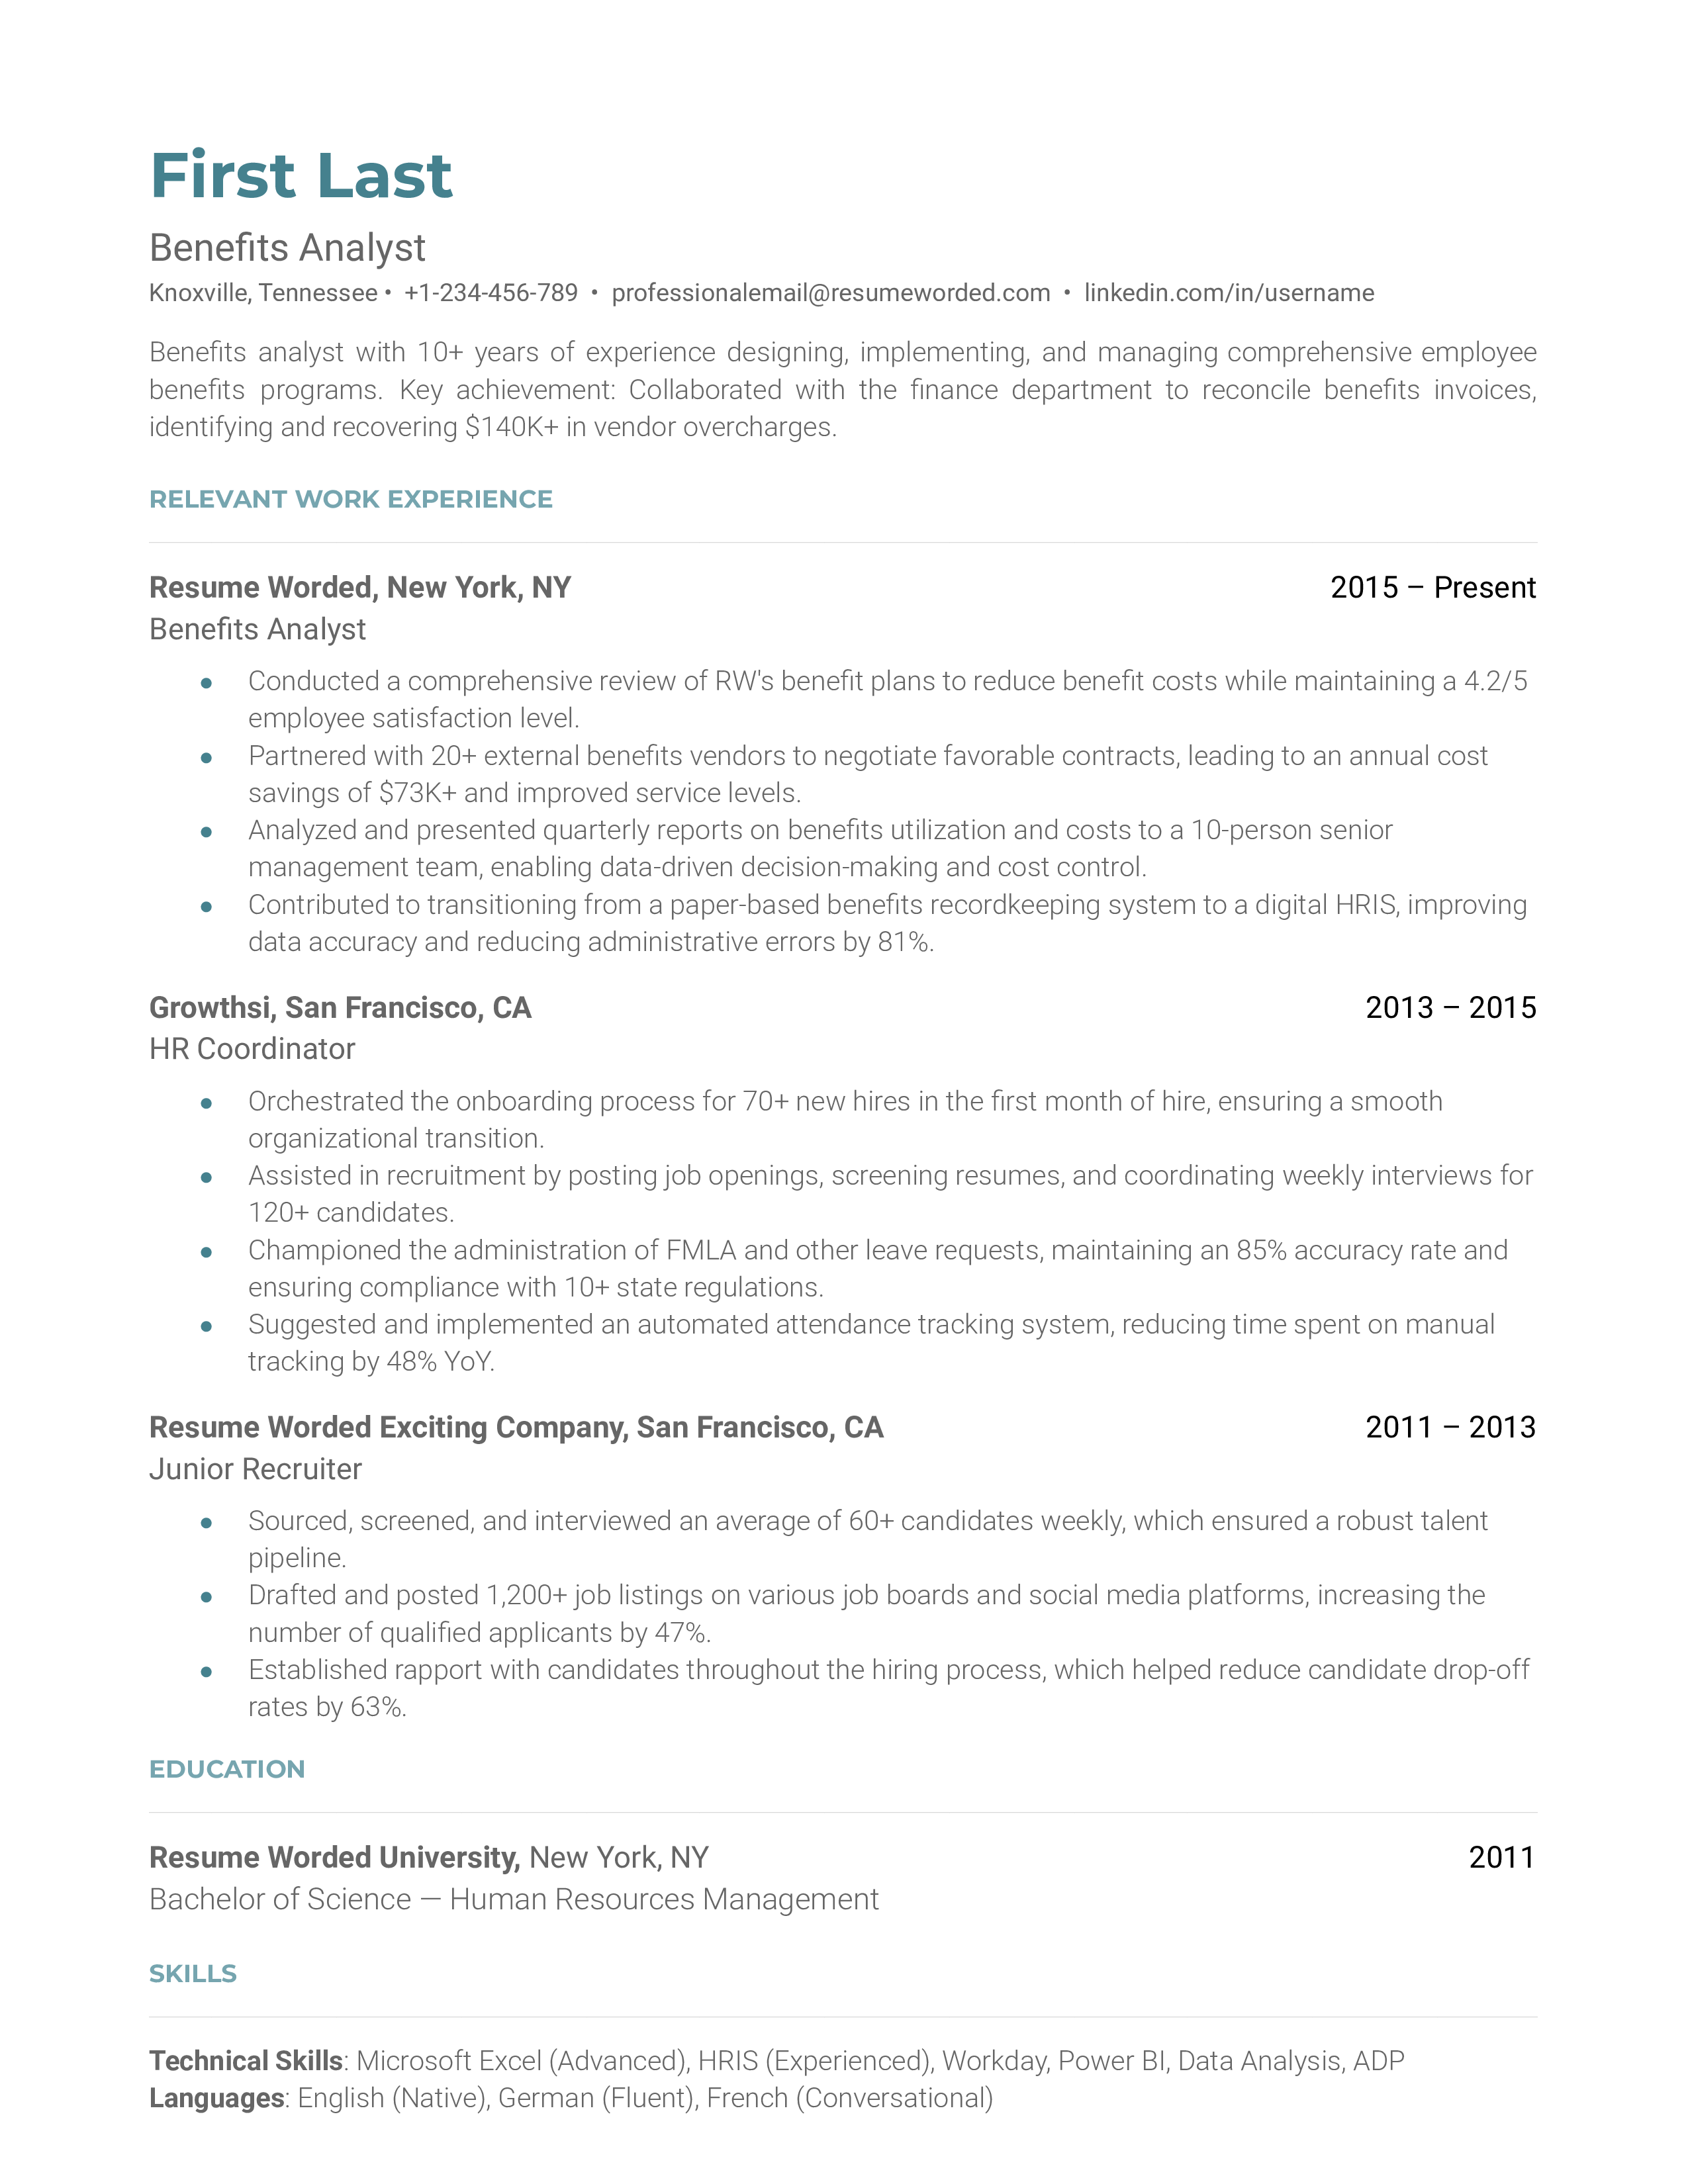 Snapshot of a well-structured CV for a Benefits Analyst role.